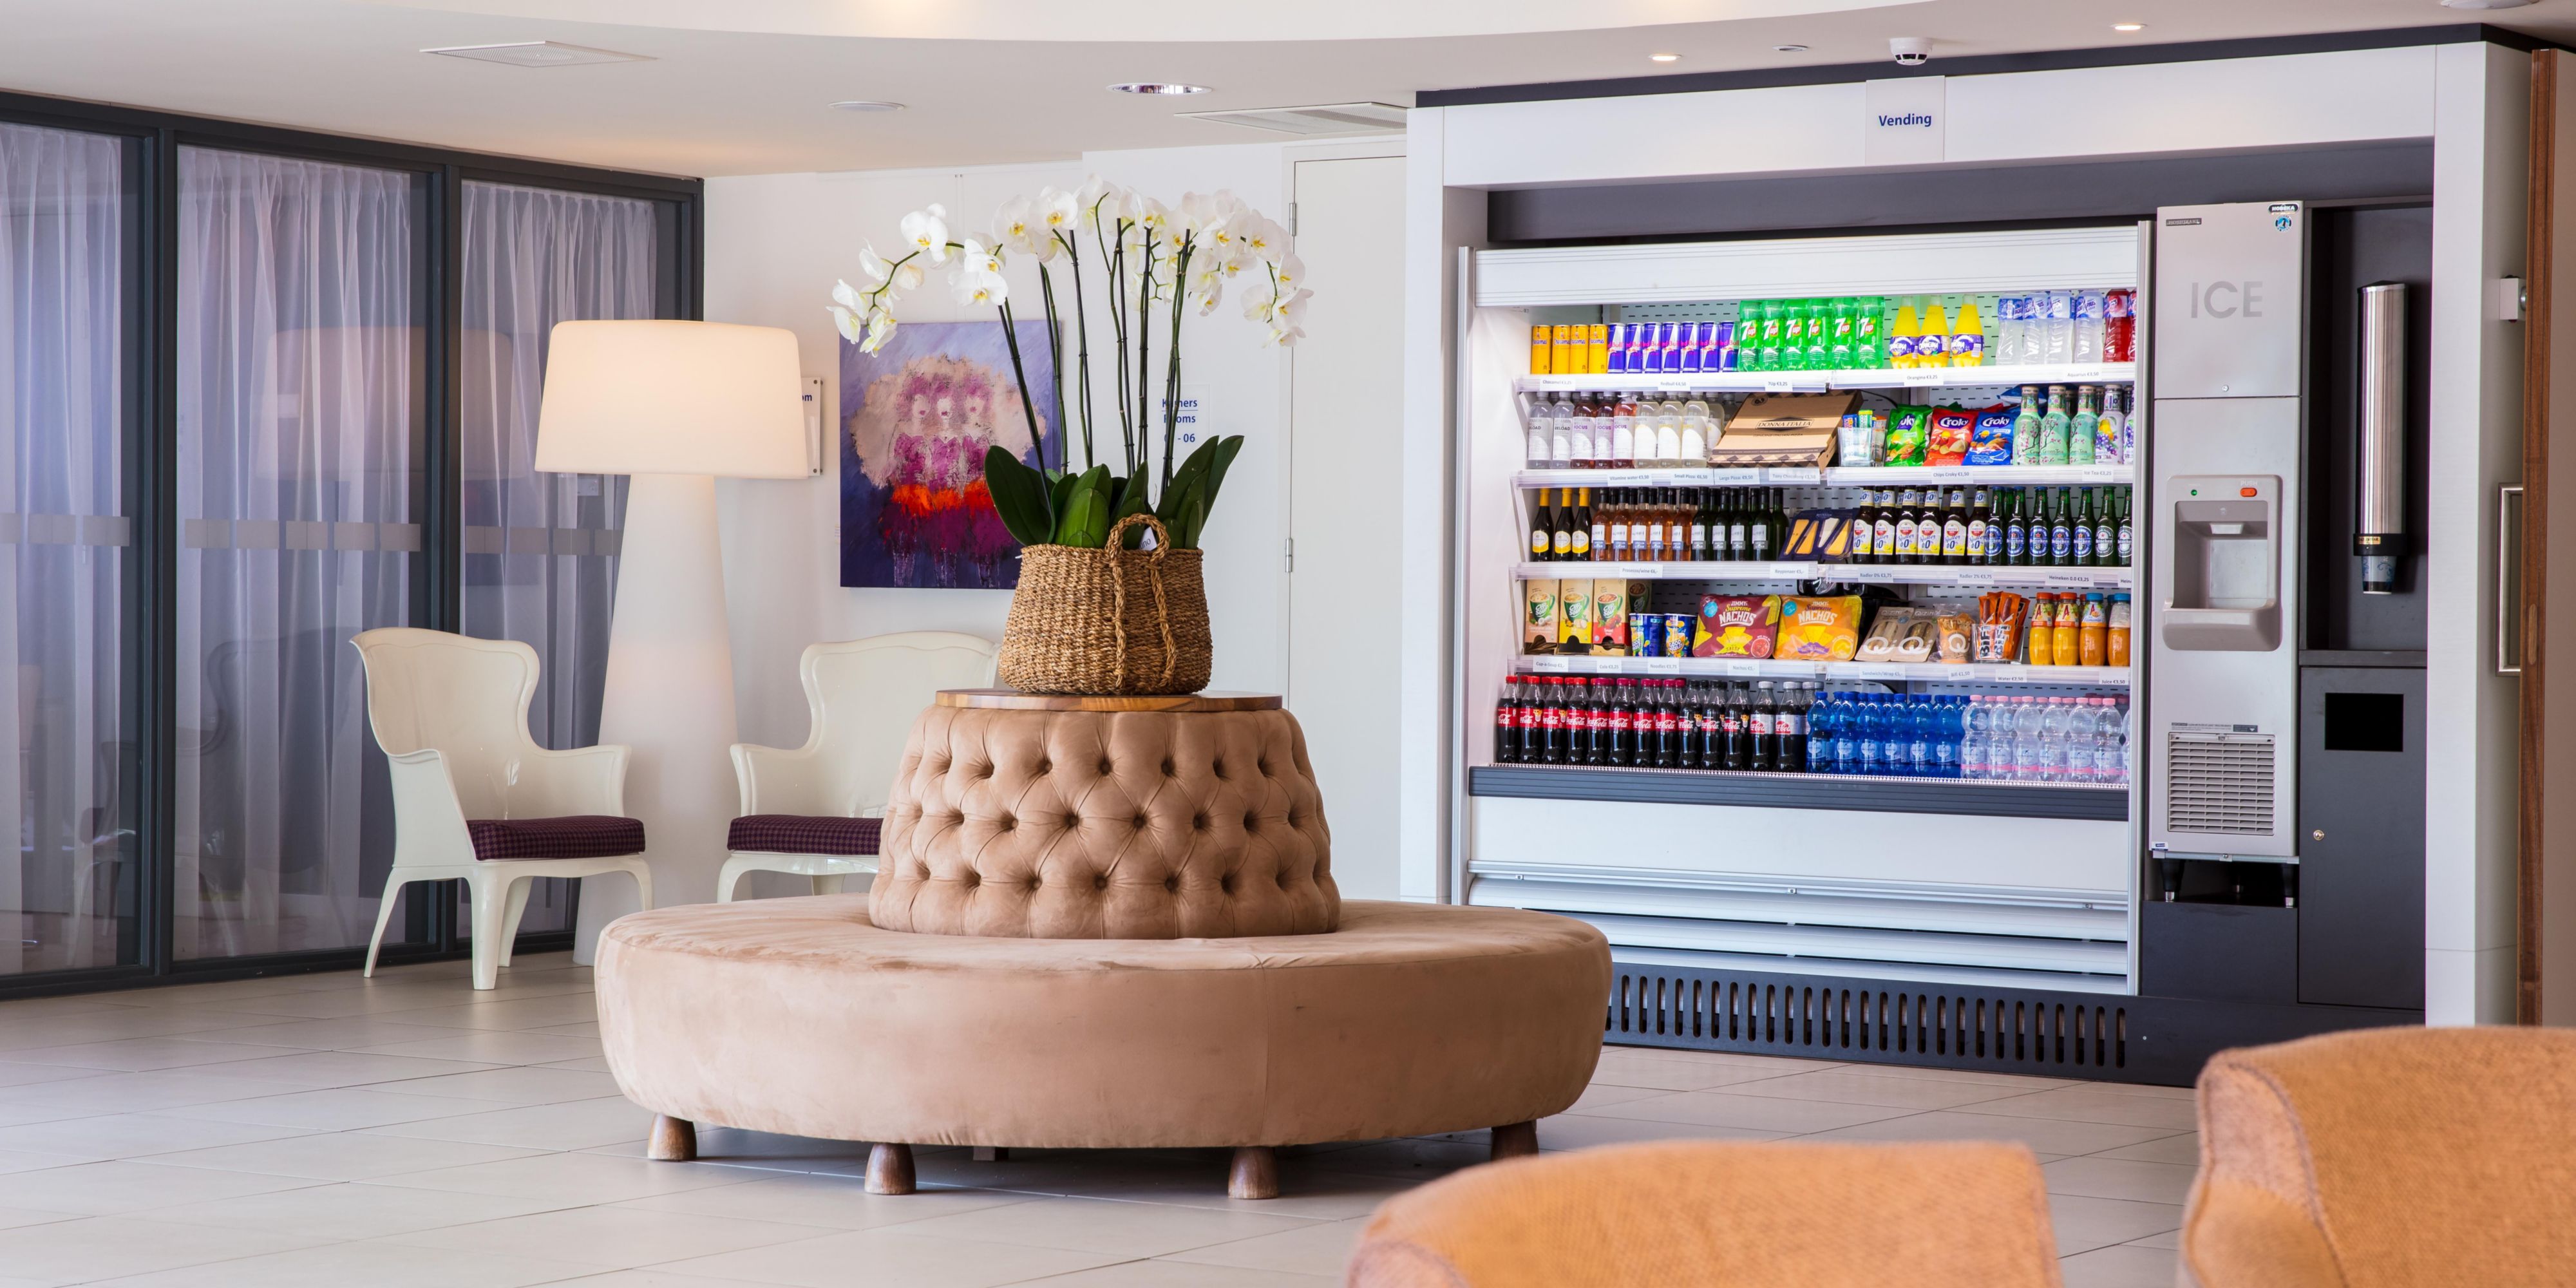 Experience convenience like never before with our 24/7 mini kiosk, always ready to serve our valued guests. Whether it's a late-night snack or a quick drink, we've got you covered around the clock. Your comfort is our priority!